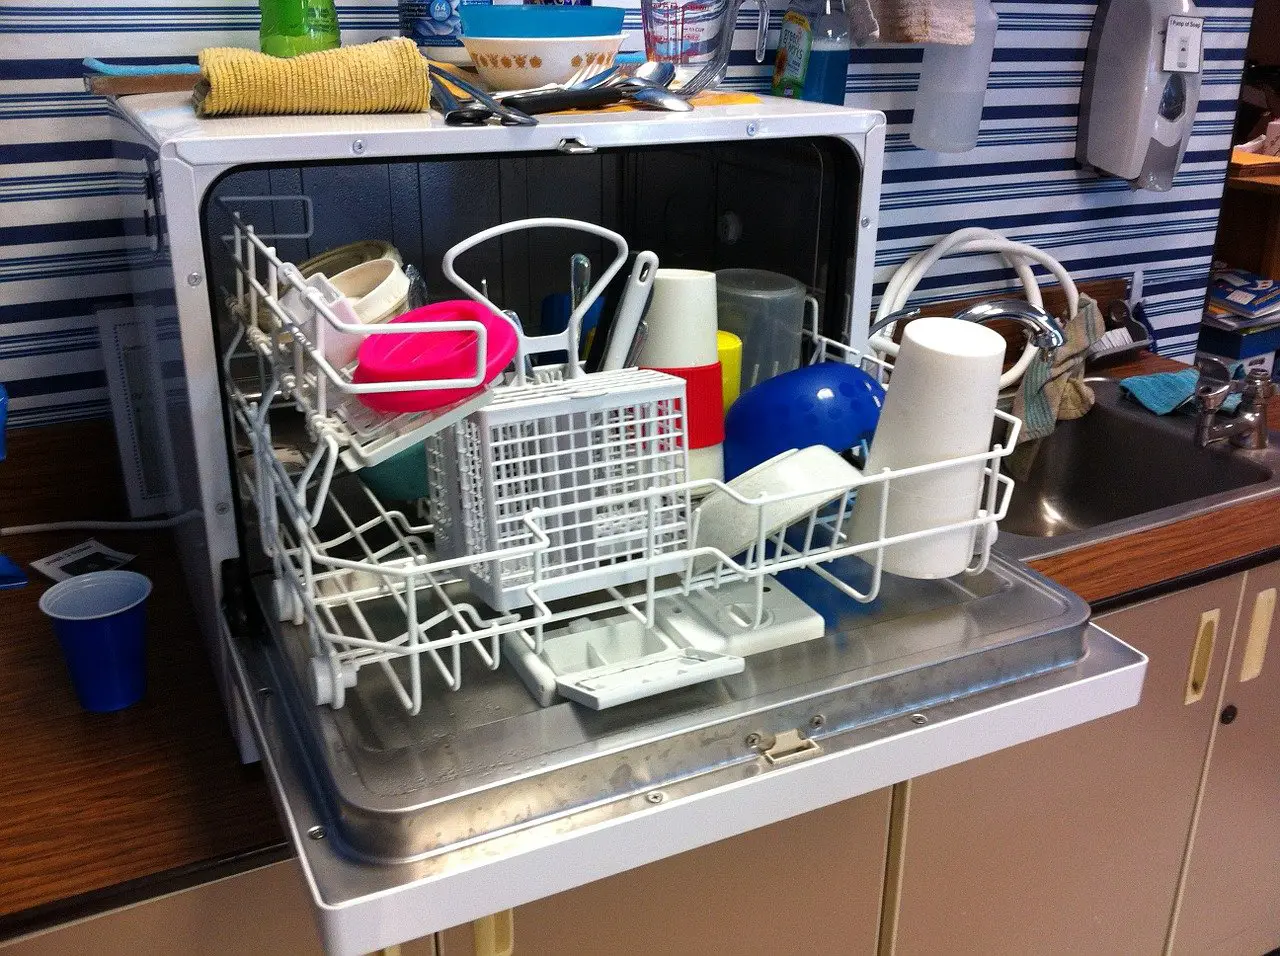 How to Fix Smelly Dishwasher